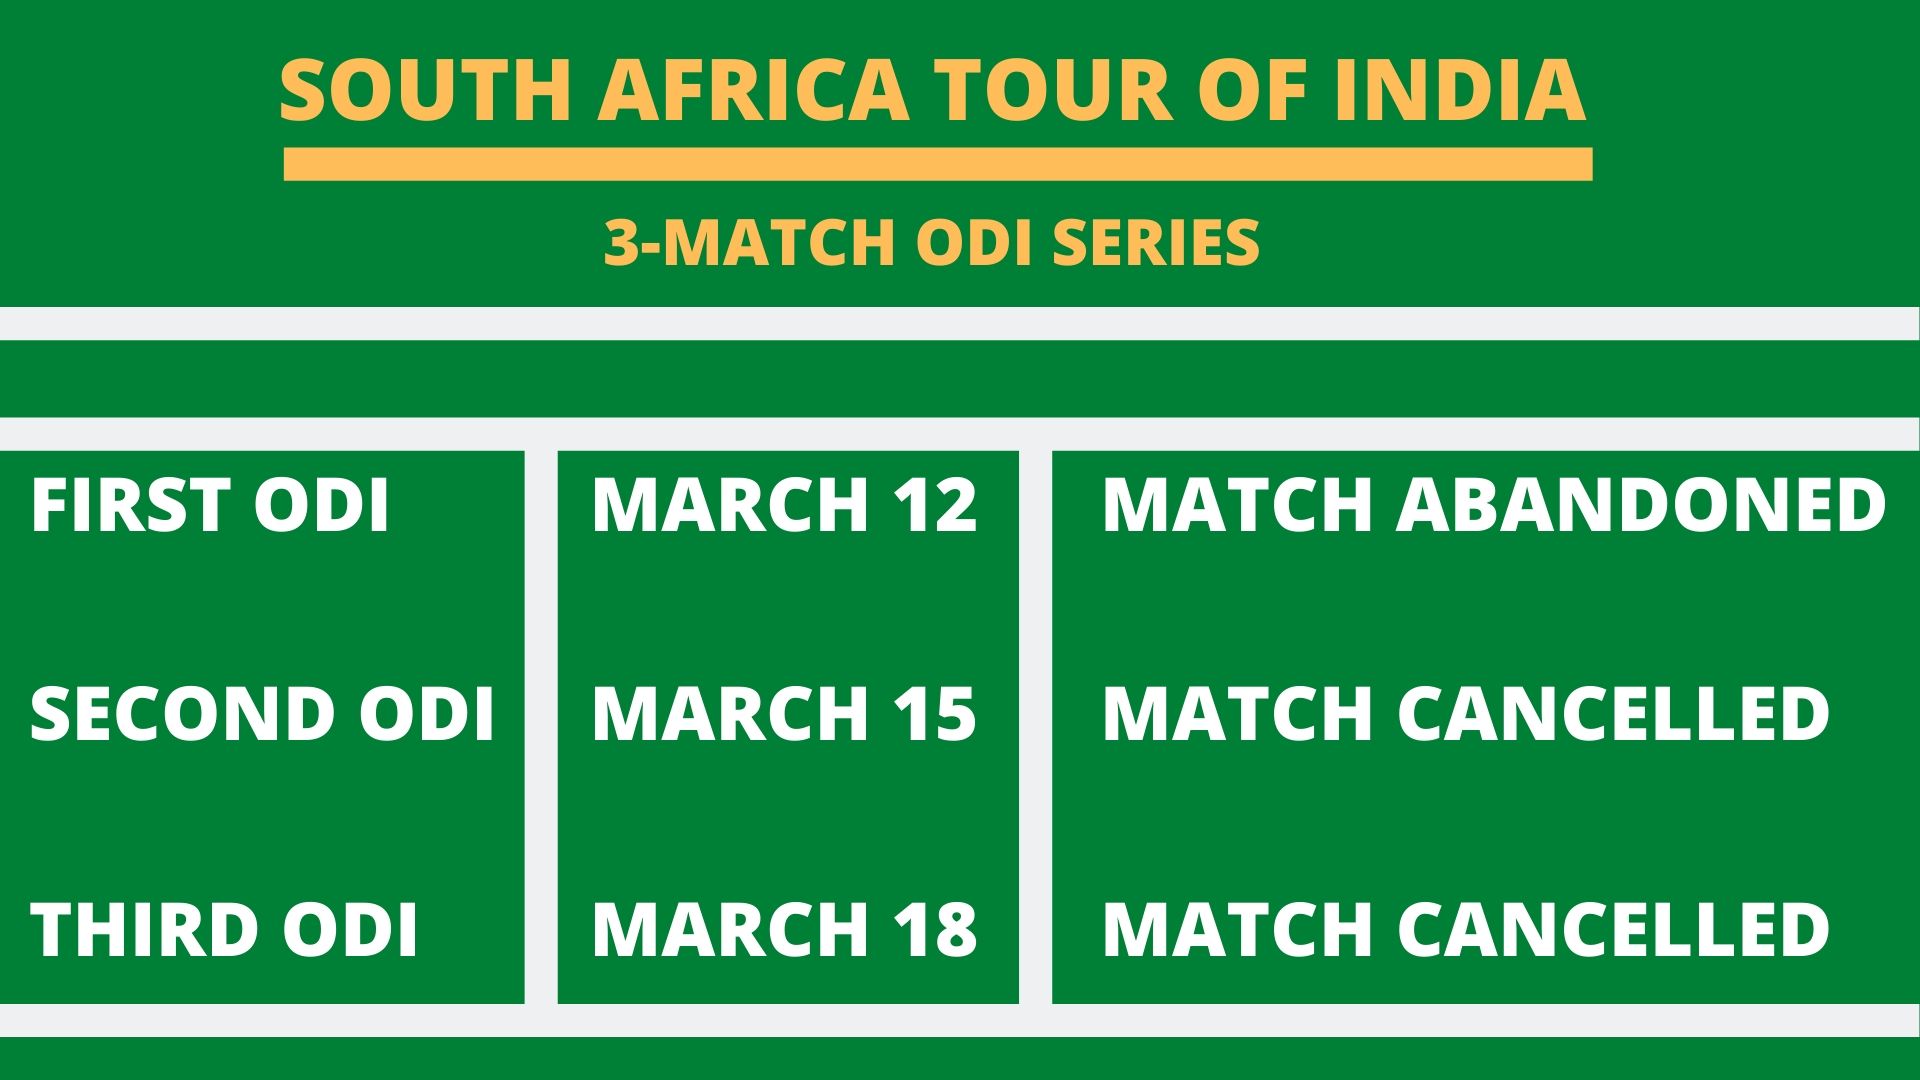 South Africa tour of India